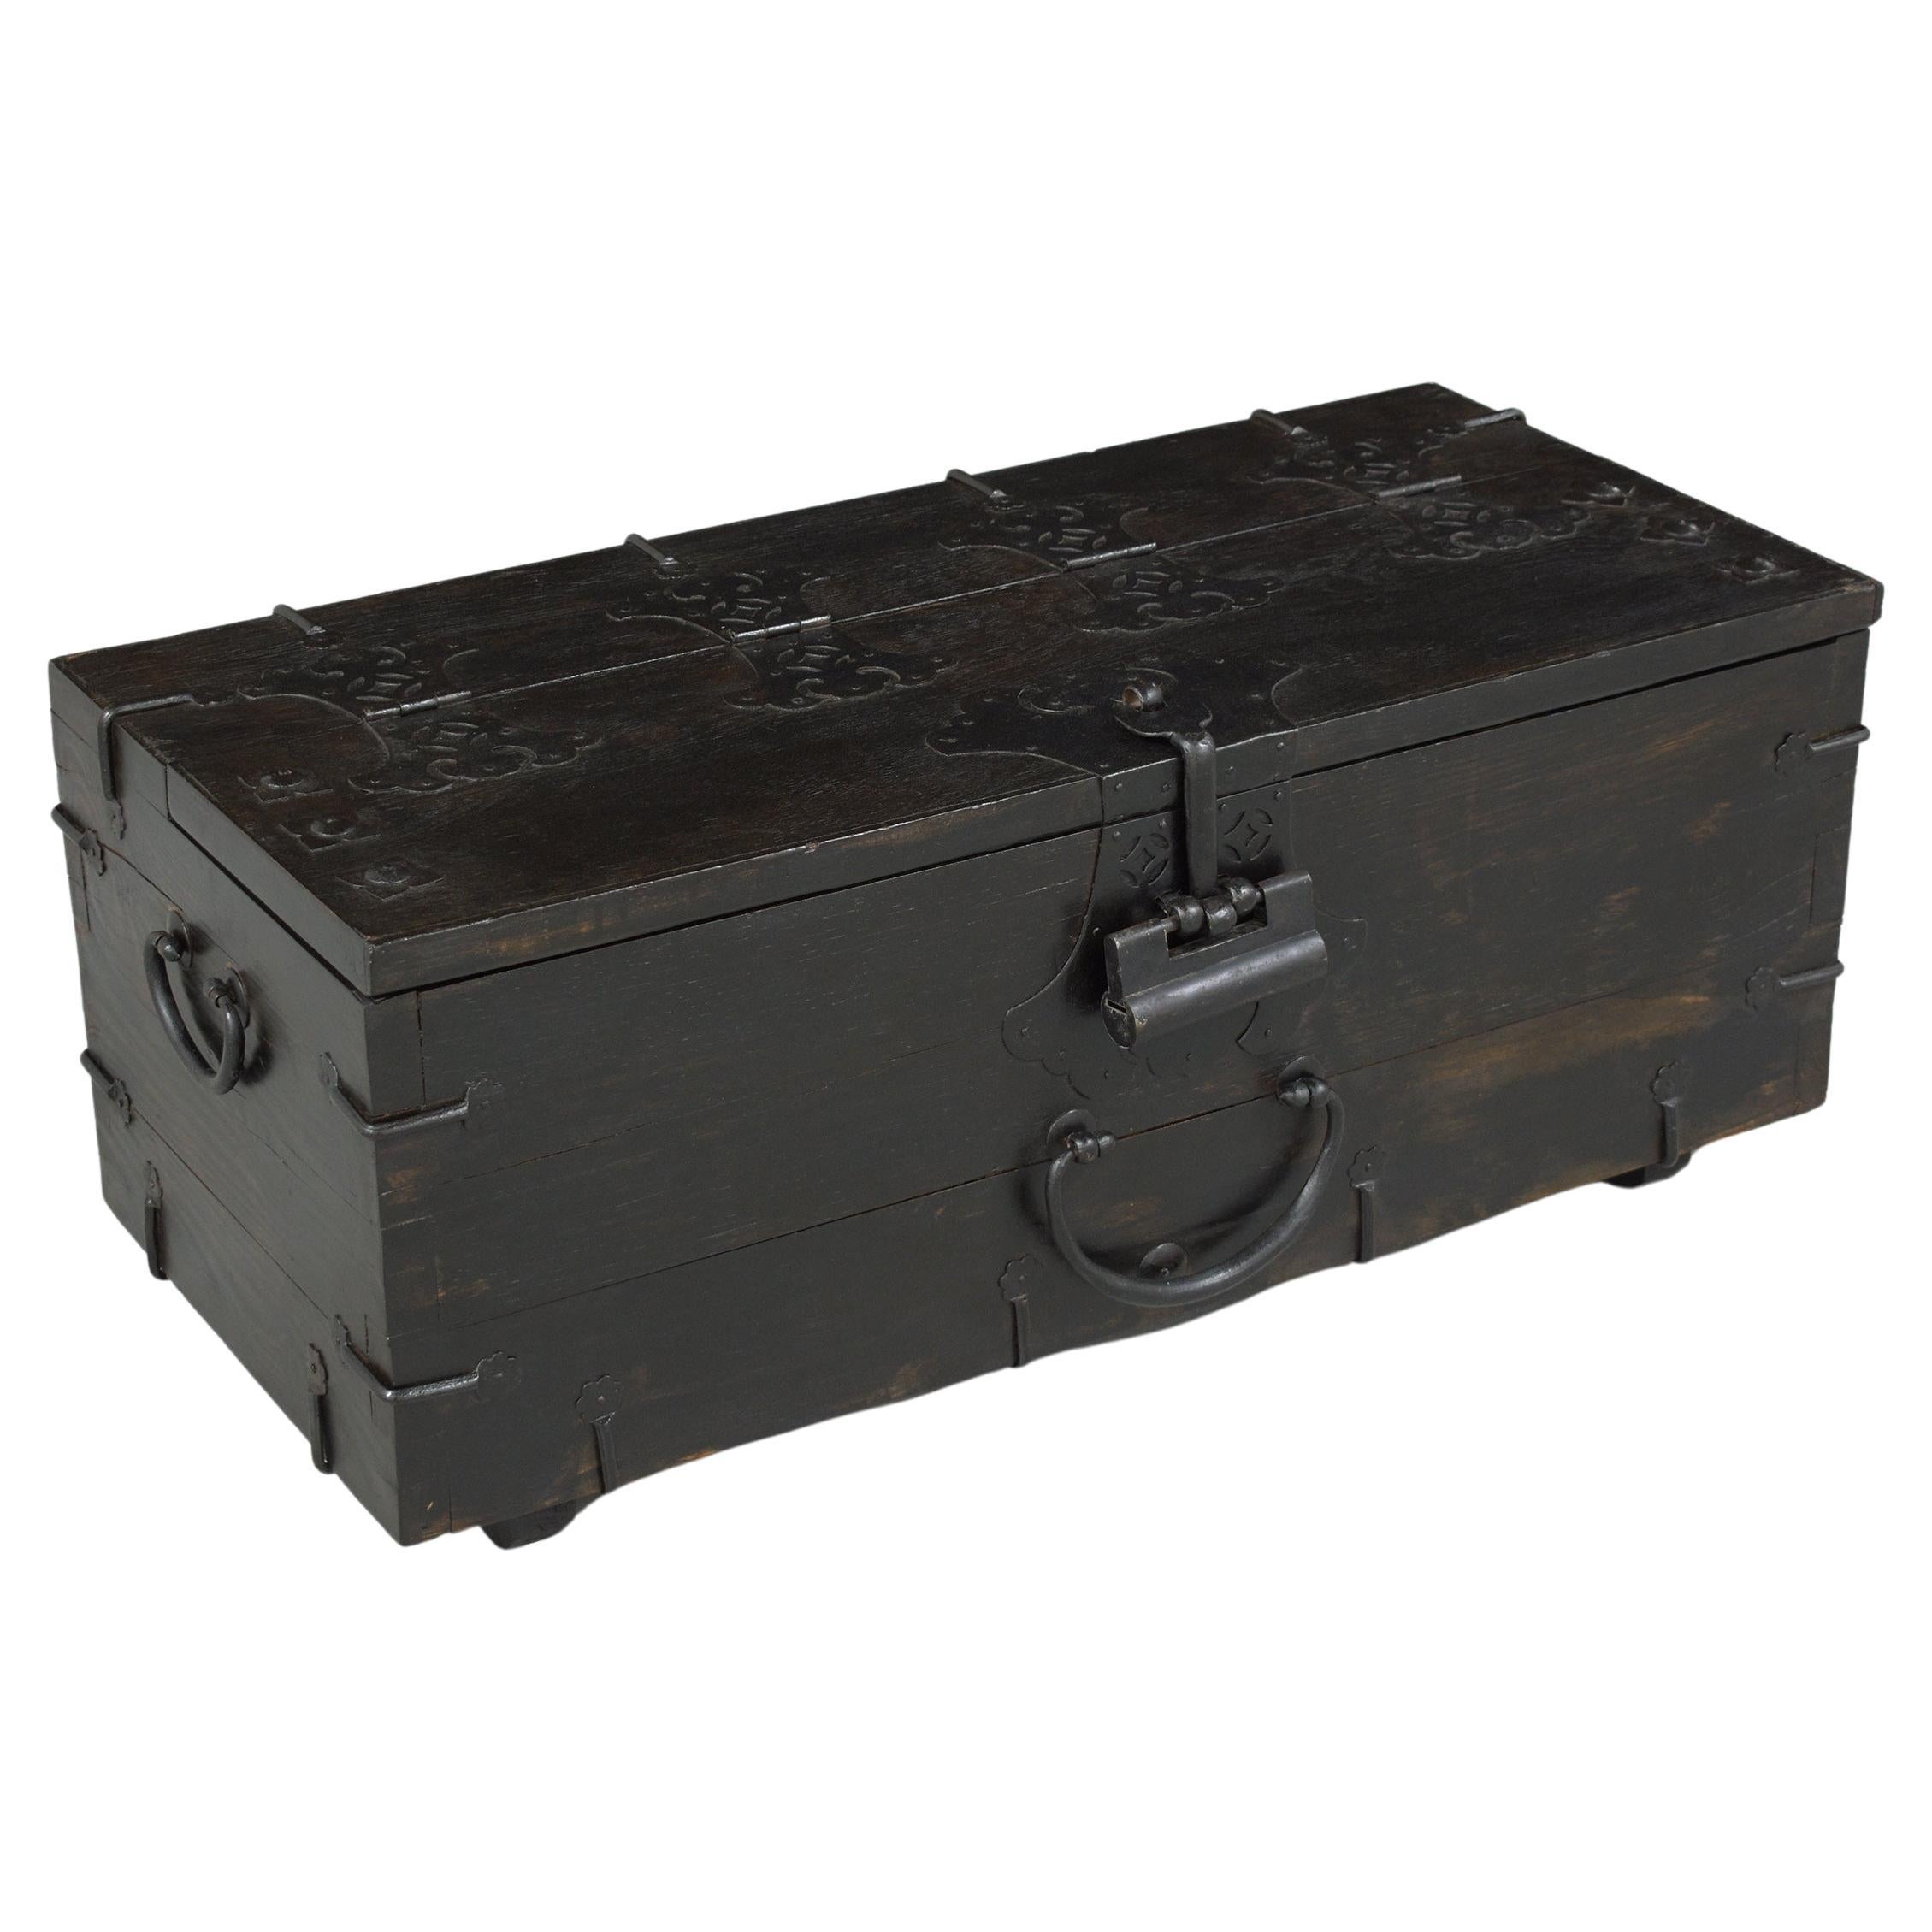 Restored 1950s Chinese Export Wood Trunk with Iron Accents - Vintage Charm For Sale